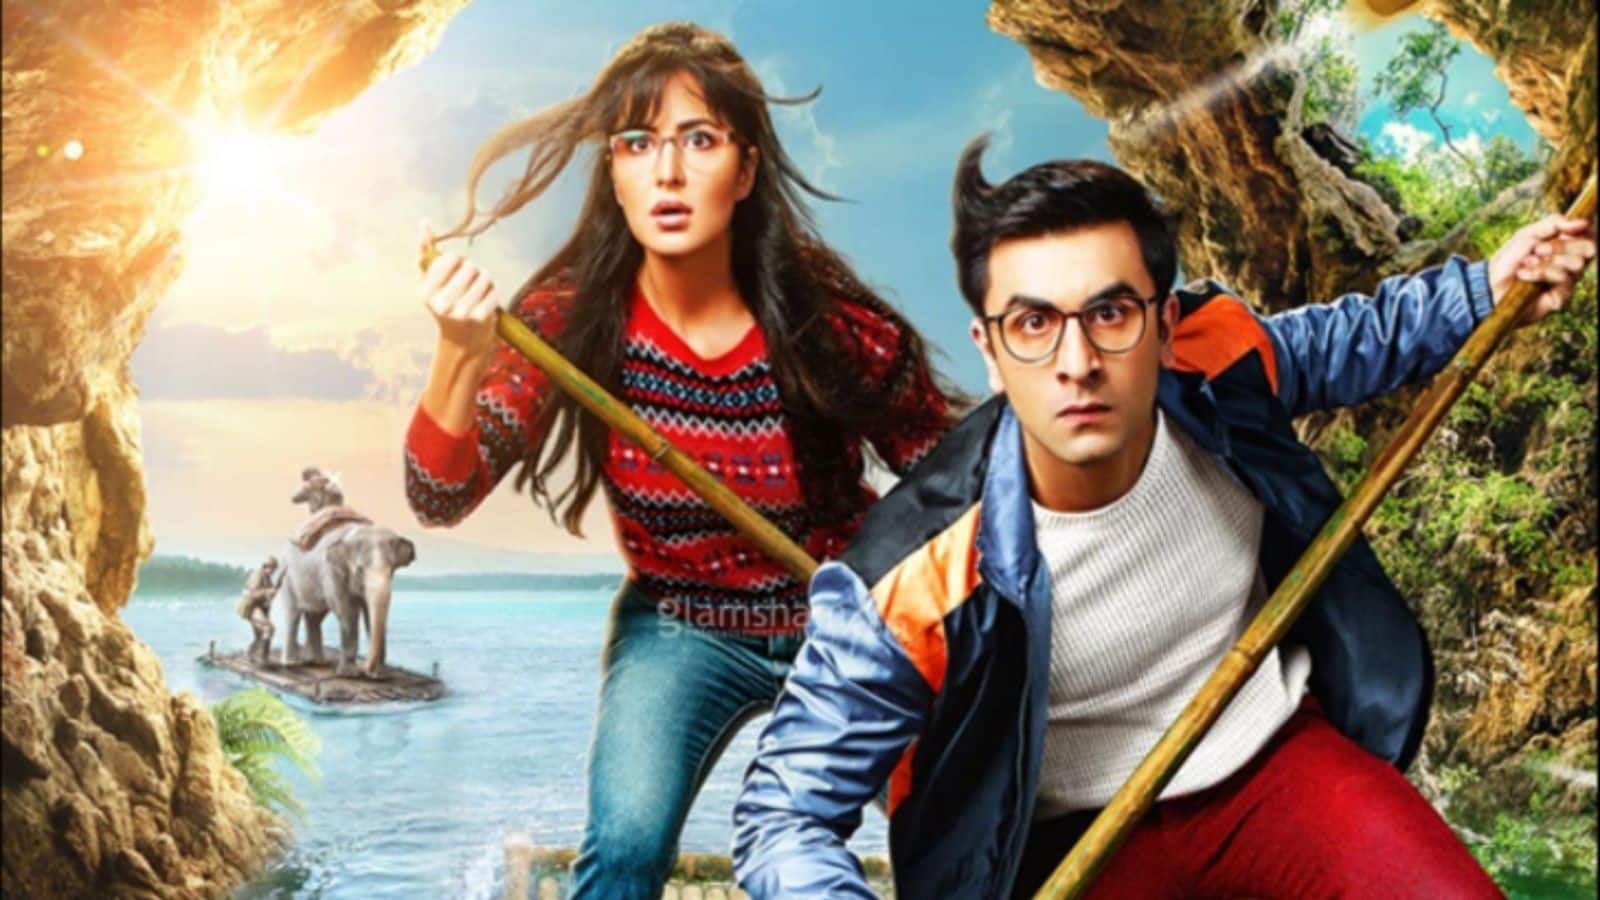 Bollywood adventure films for young audiences